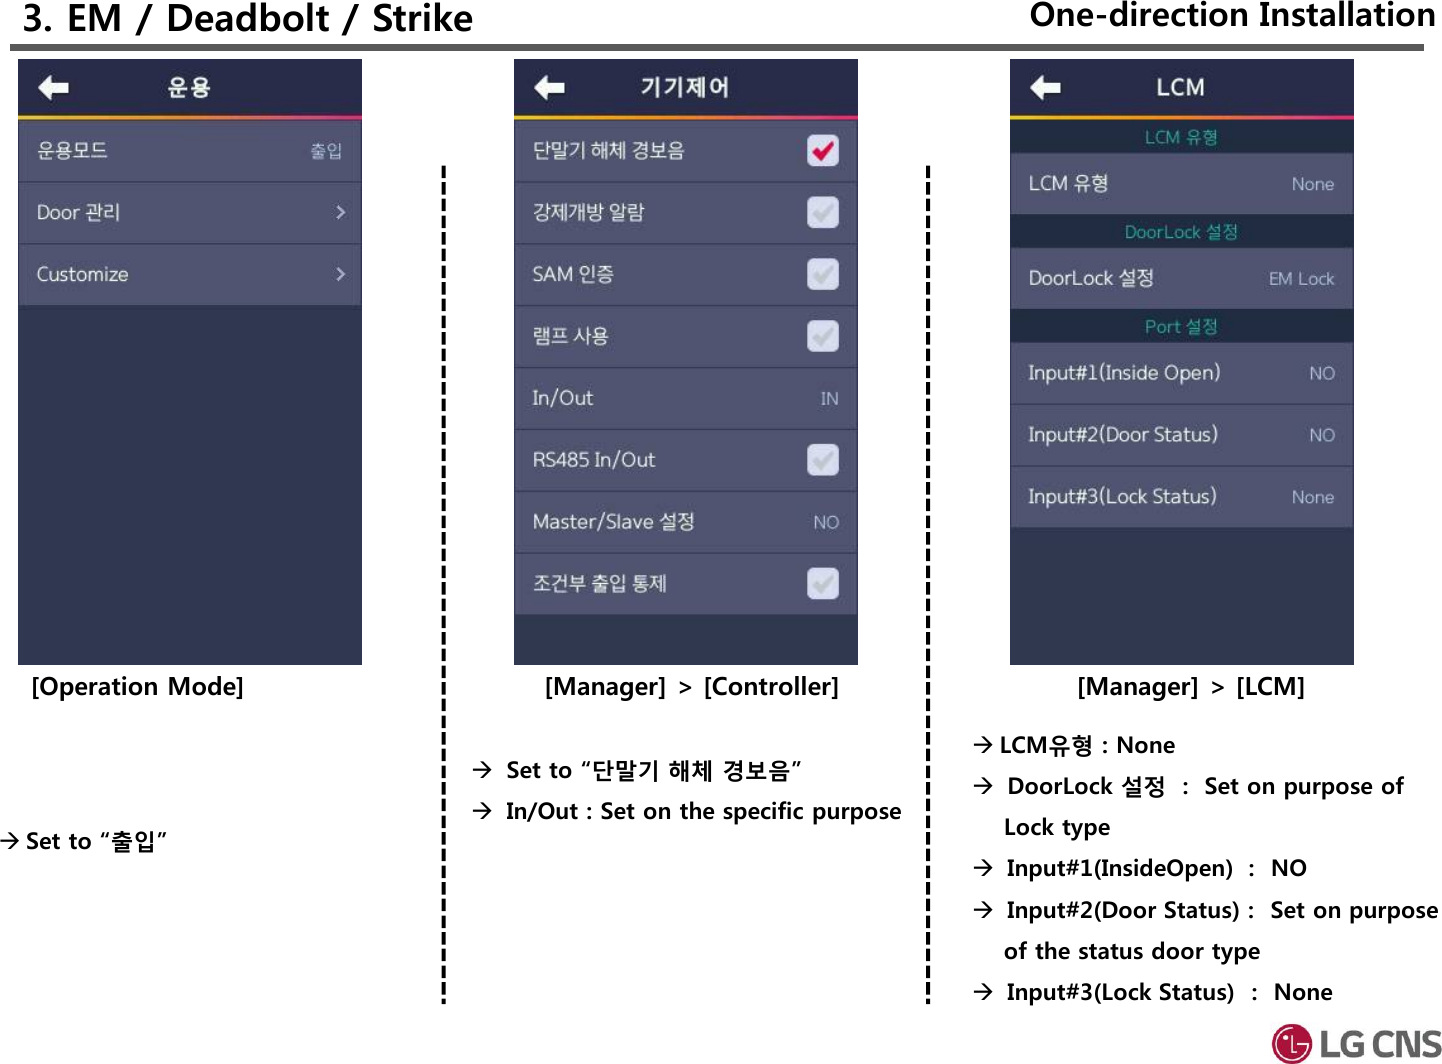 3. EM / Deadbolt / Strike[Manager] &gt; [Controller]Set to “단말기 해체 경보음”In/Out : Set on the specific purpose [Manager] &gt; [LCM]LCM유형 : NoneDoorLock 설정 :  Set on purpose of Lock typeInput#1(InsideOpen) :  NOInput#2(Door Status) :  Set on purpose of the status door typeInput#3(Lock Status) :  None[Operation Mode]Set to “출입”One-direction Installation